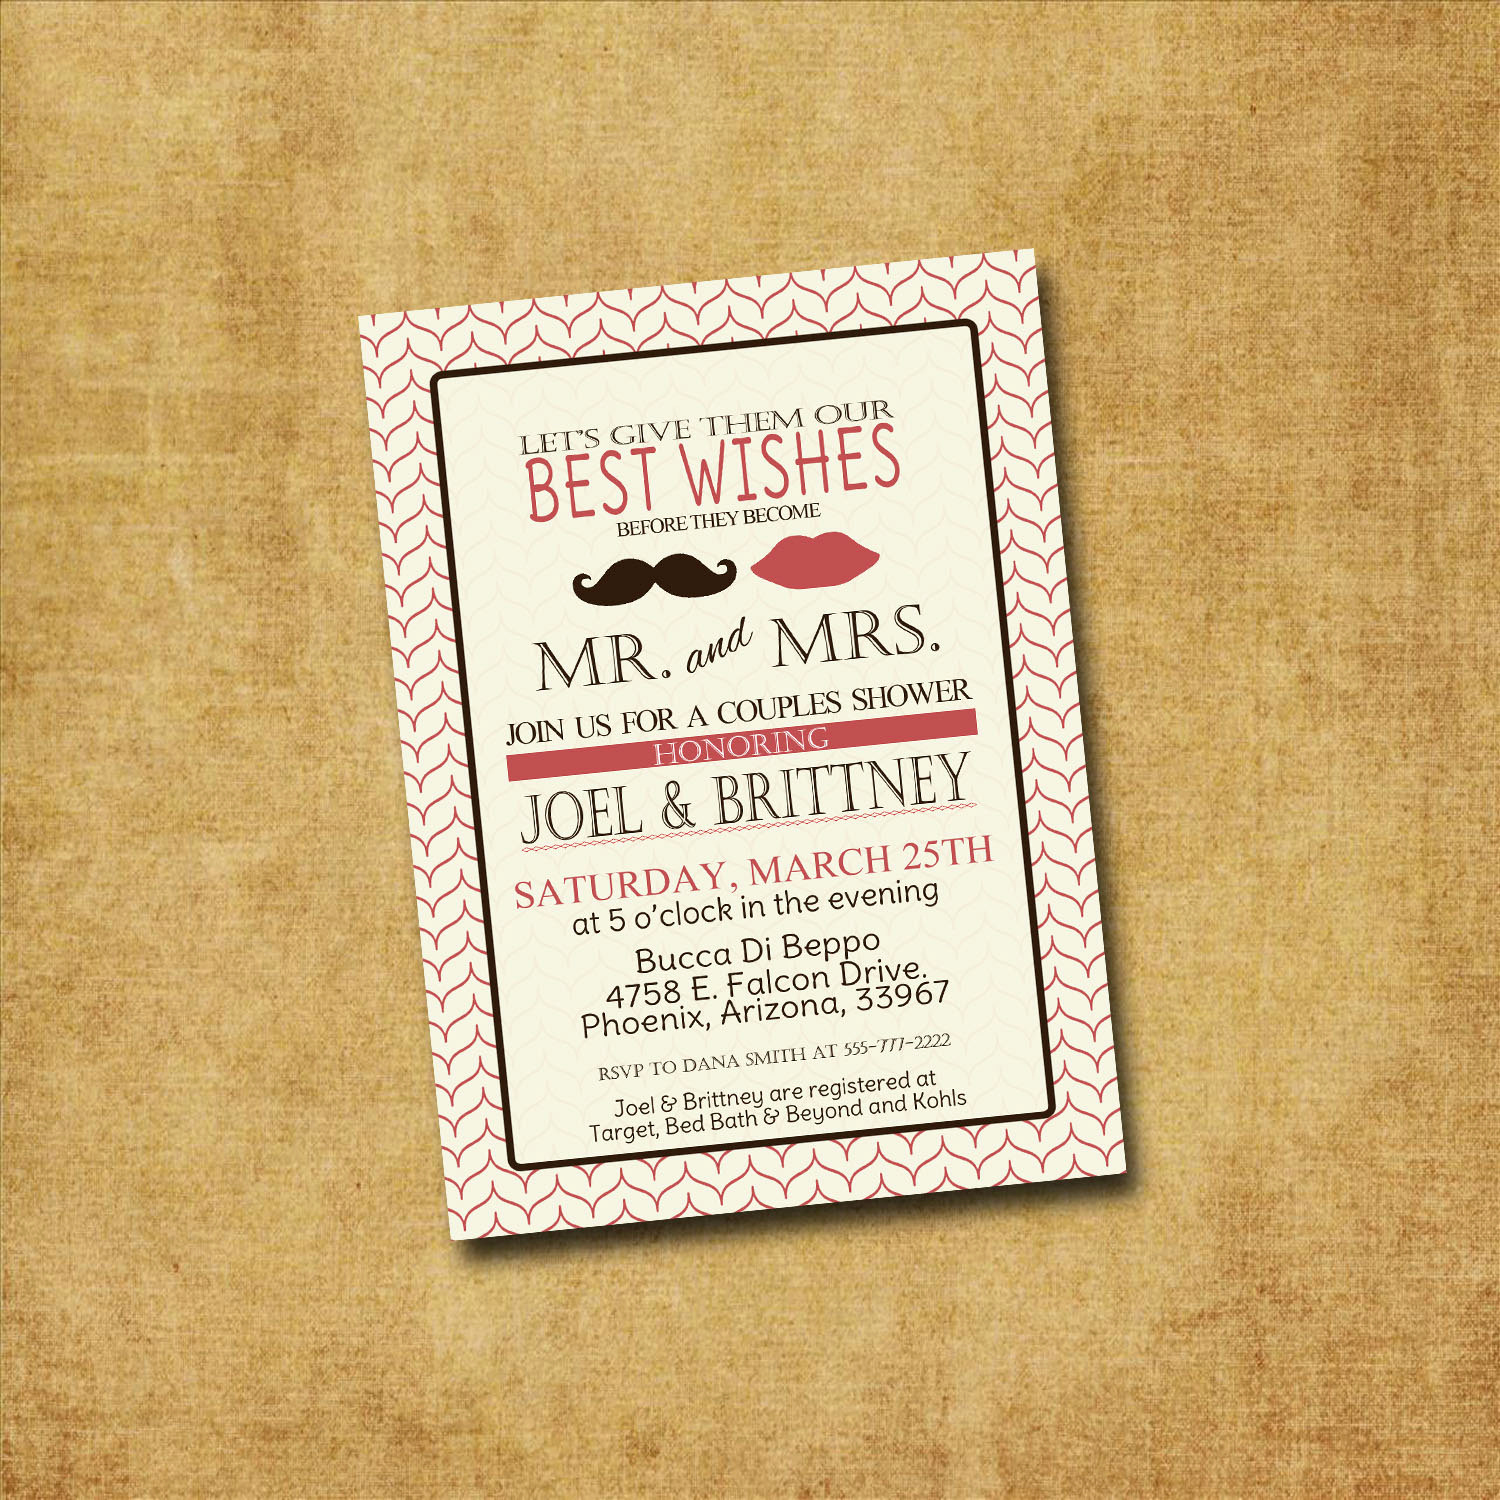 Couples Shower Invitation Templates Free Elegant Baby Gift and Shower Decoration Ideas Baby Invitations